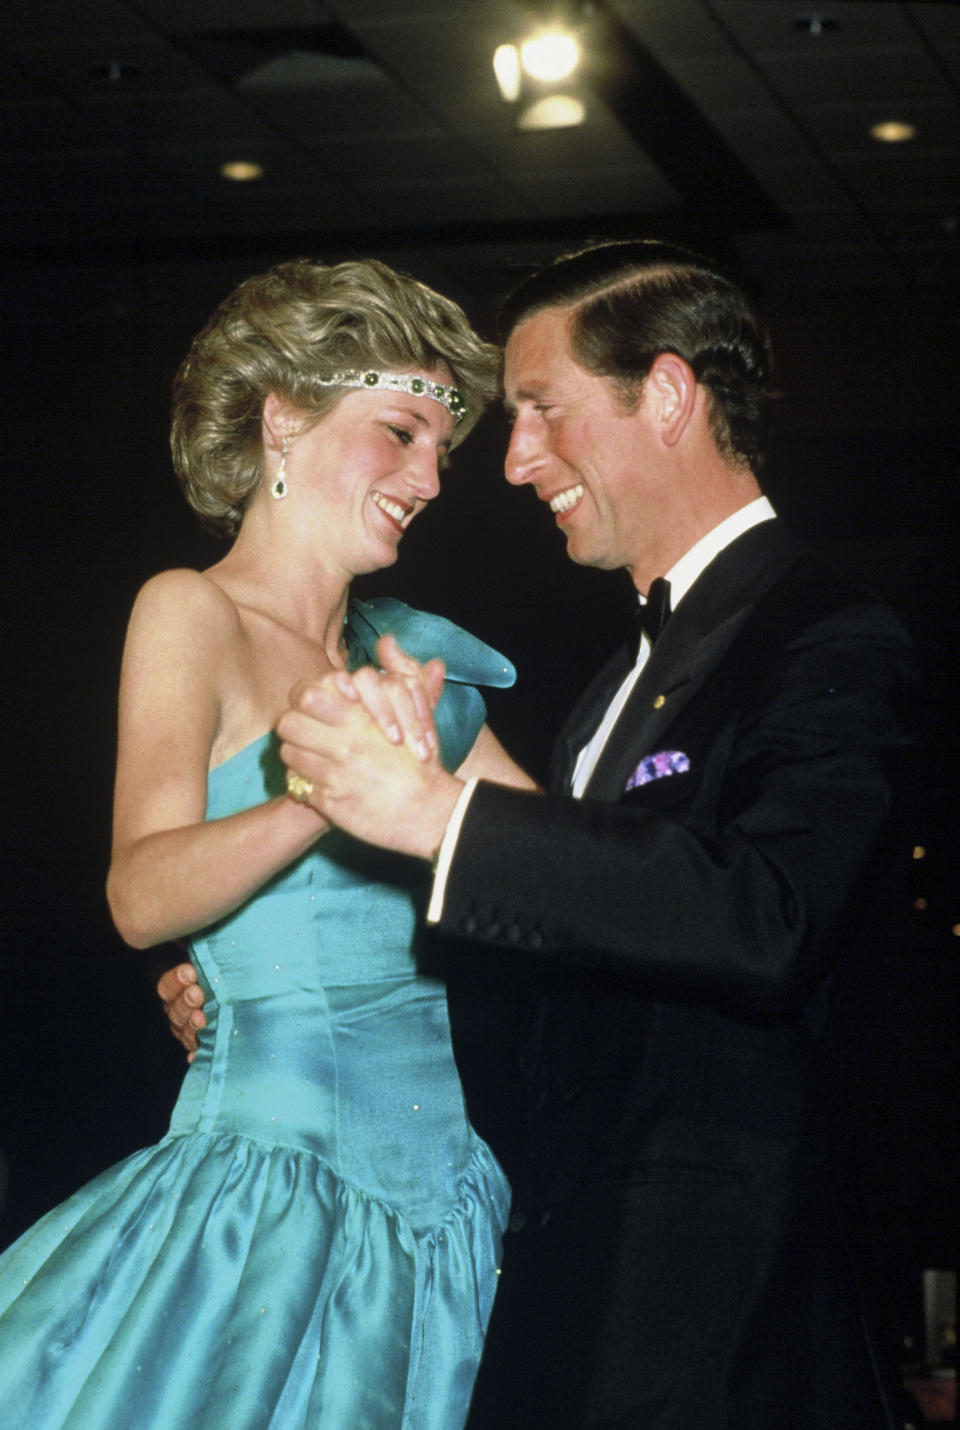 MELBOURNE, AUSTRALIA - OCTOBER 31: Prince Charles, Prince of Wales and Diana, Princess of Wales, wearing a green satin evening dress designed by David and Elizabeth Emanuel and an emerald necklace as a headband, dance together during a gala dinner dance at the Southern Cross Hotel on October 31, 1985 in Melbourne, Australia. (Photo by Anwar Hussein/Getty Images)